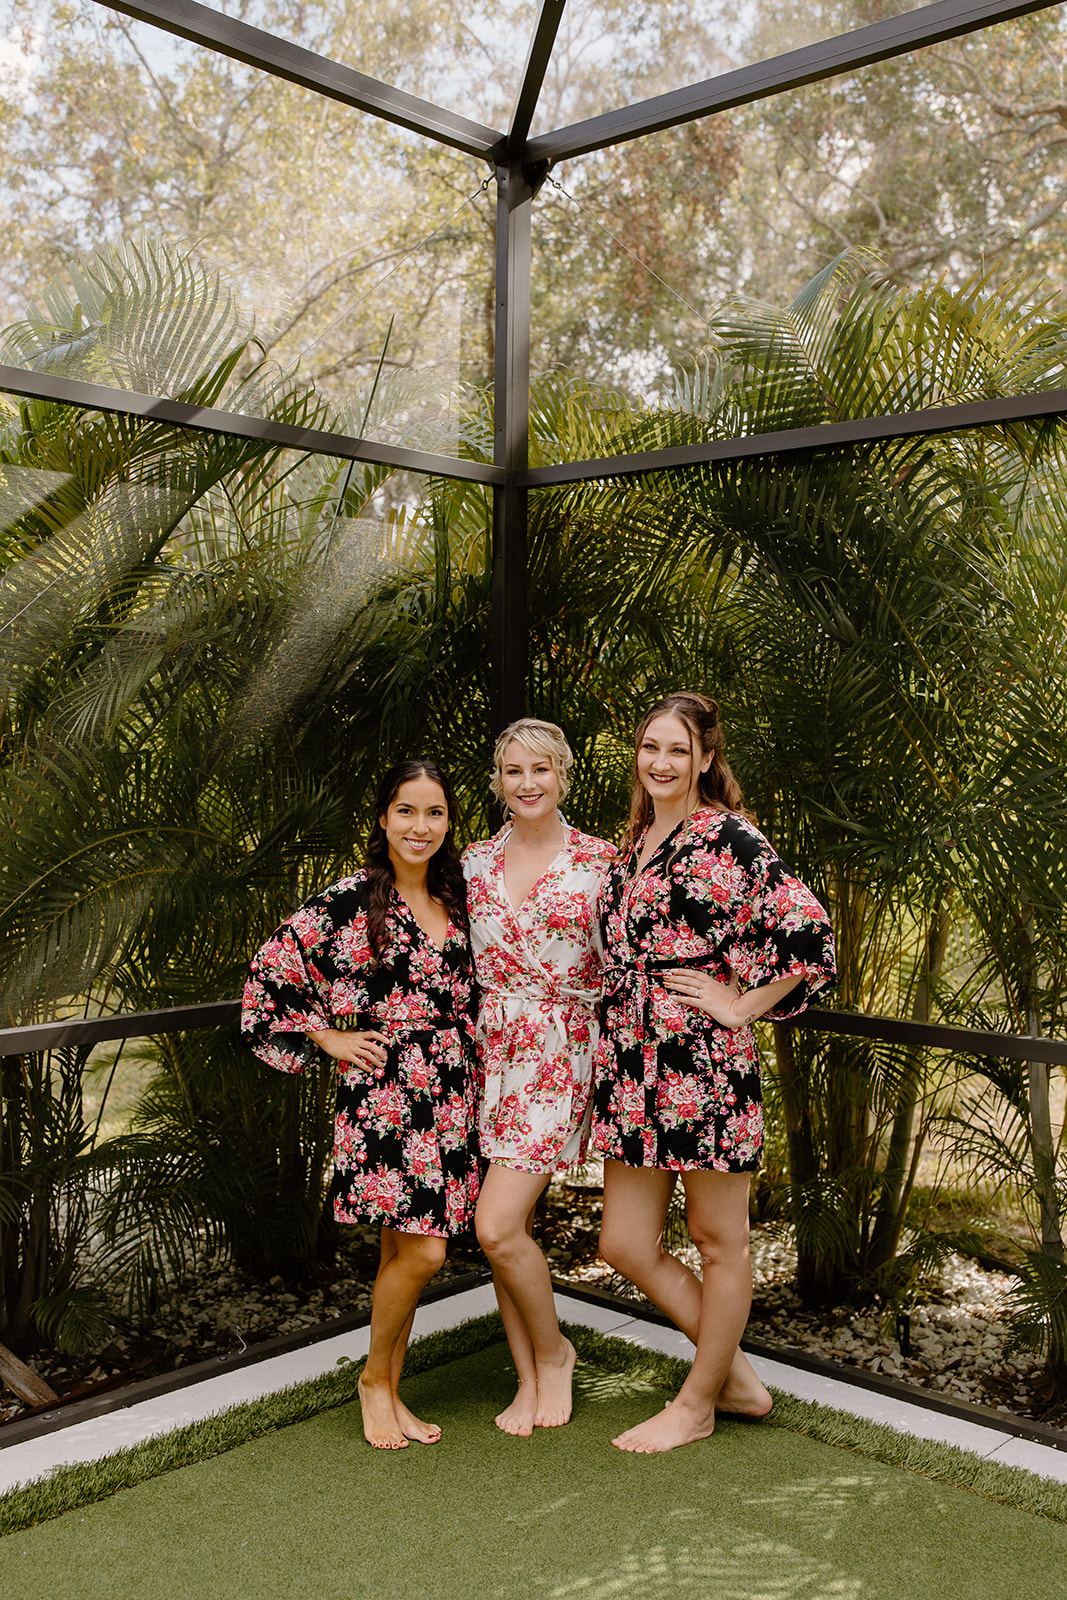 Bride and bridesmaids smiling in their matching floral robes